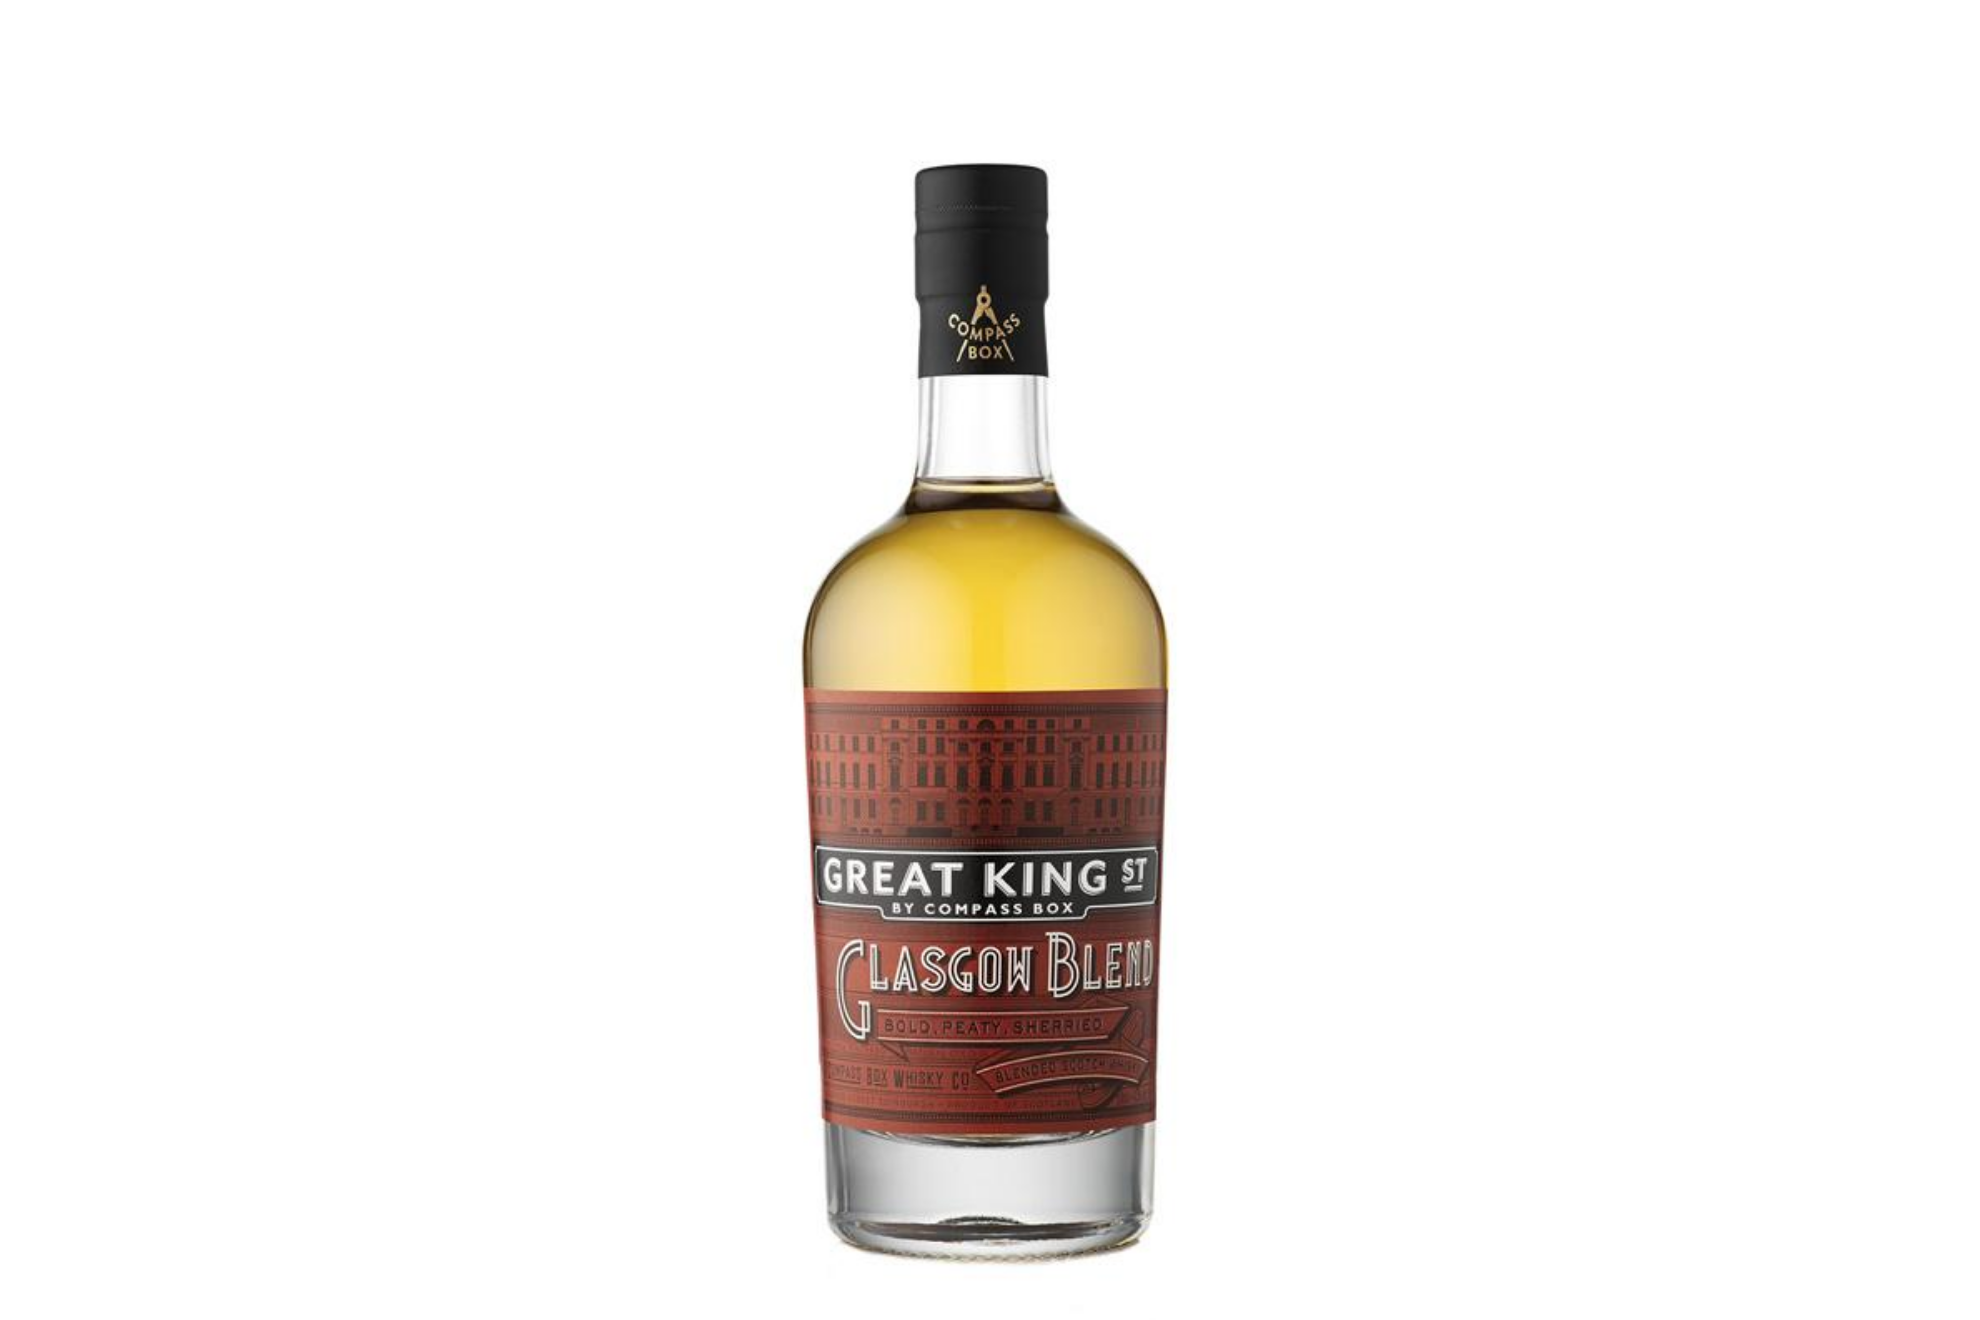 Compass Box Great Kings Street Glasgow Blend 43% 70cl